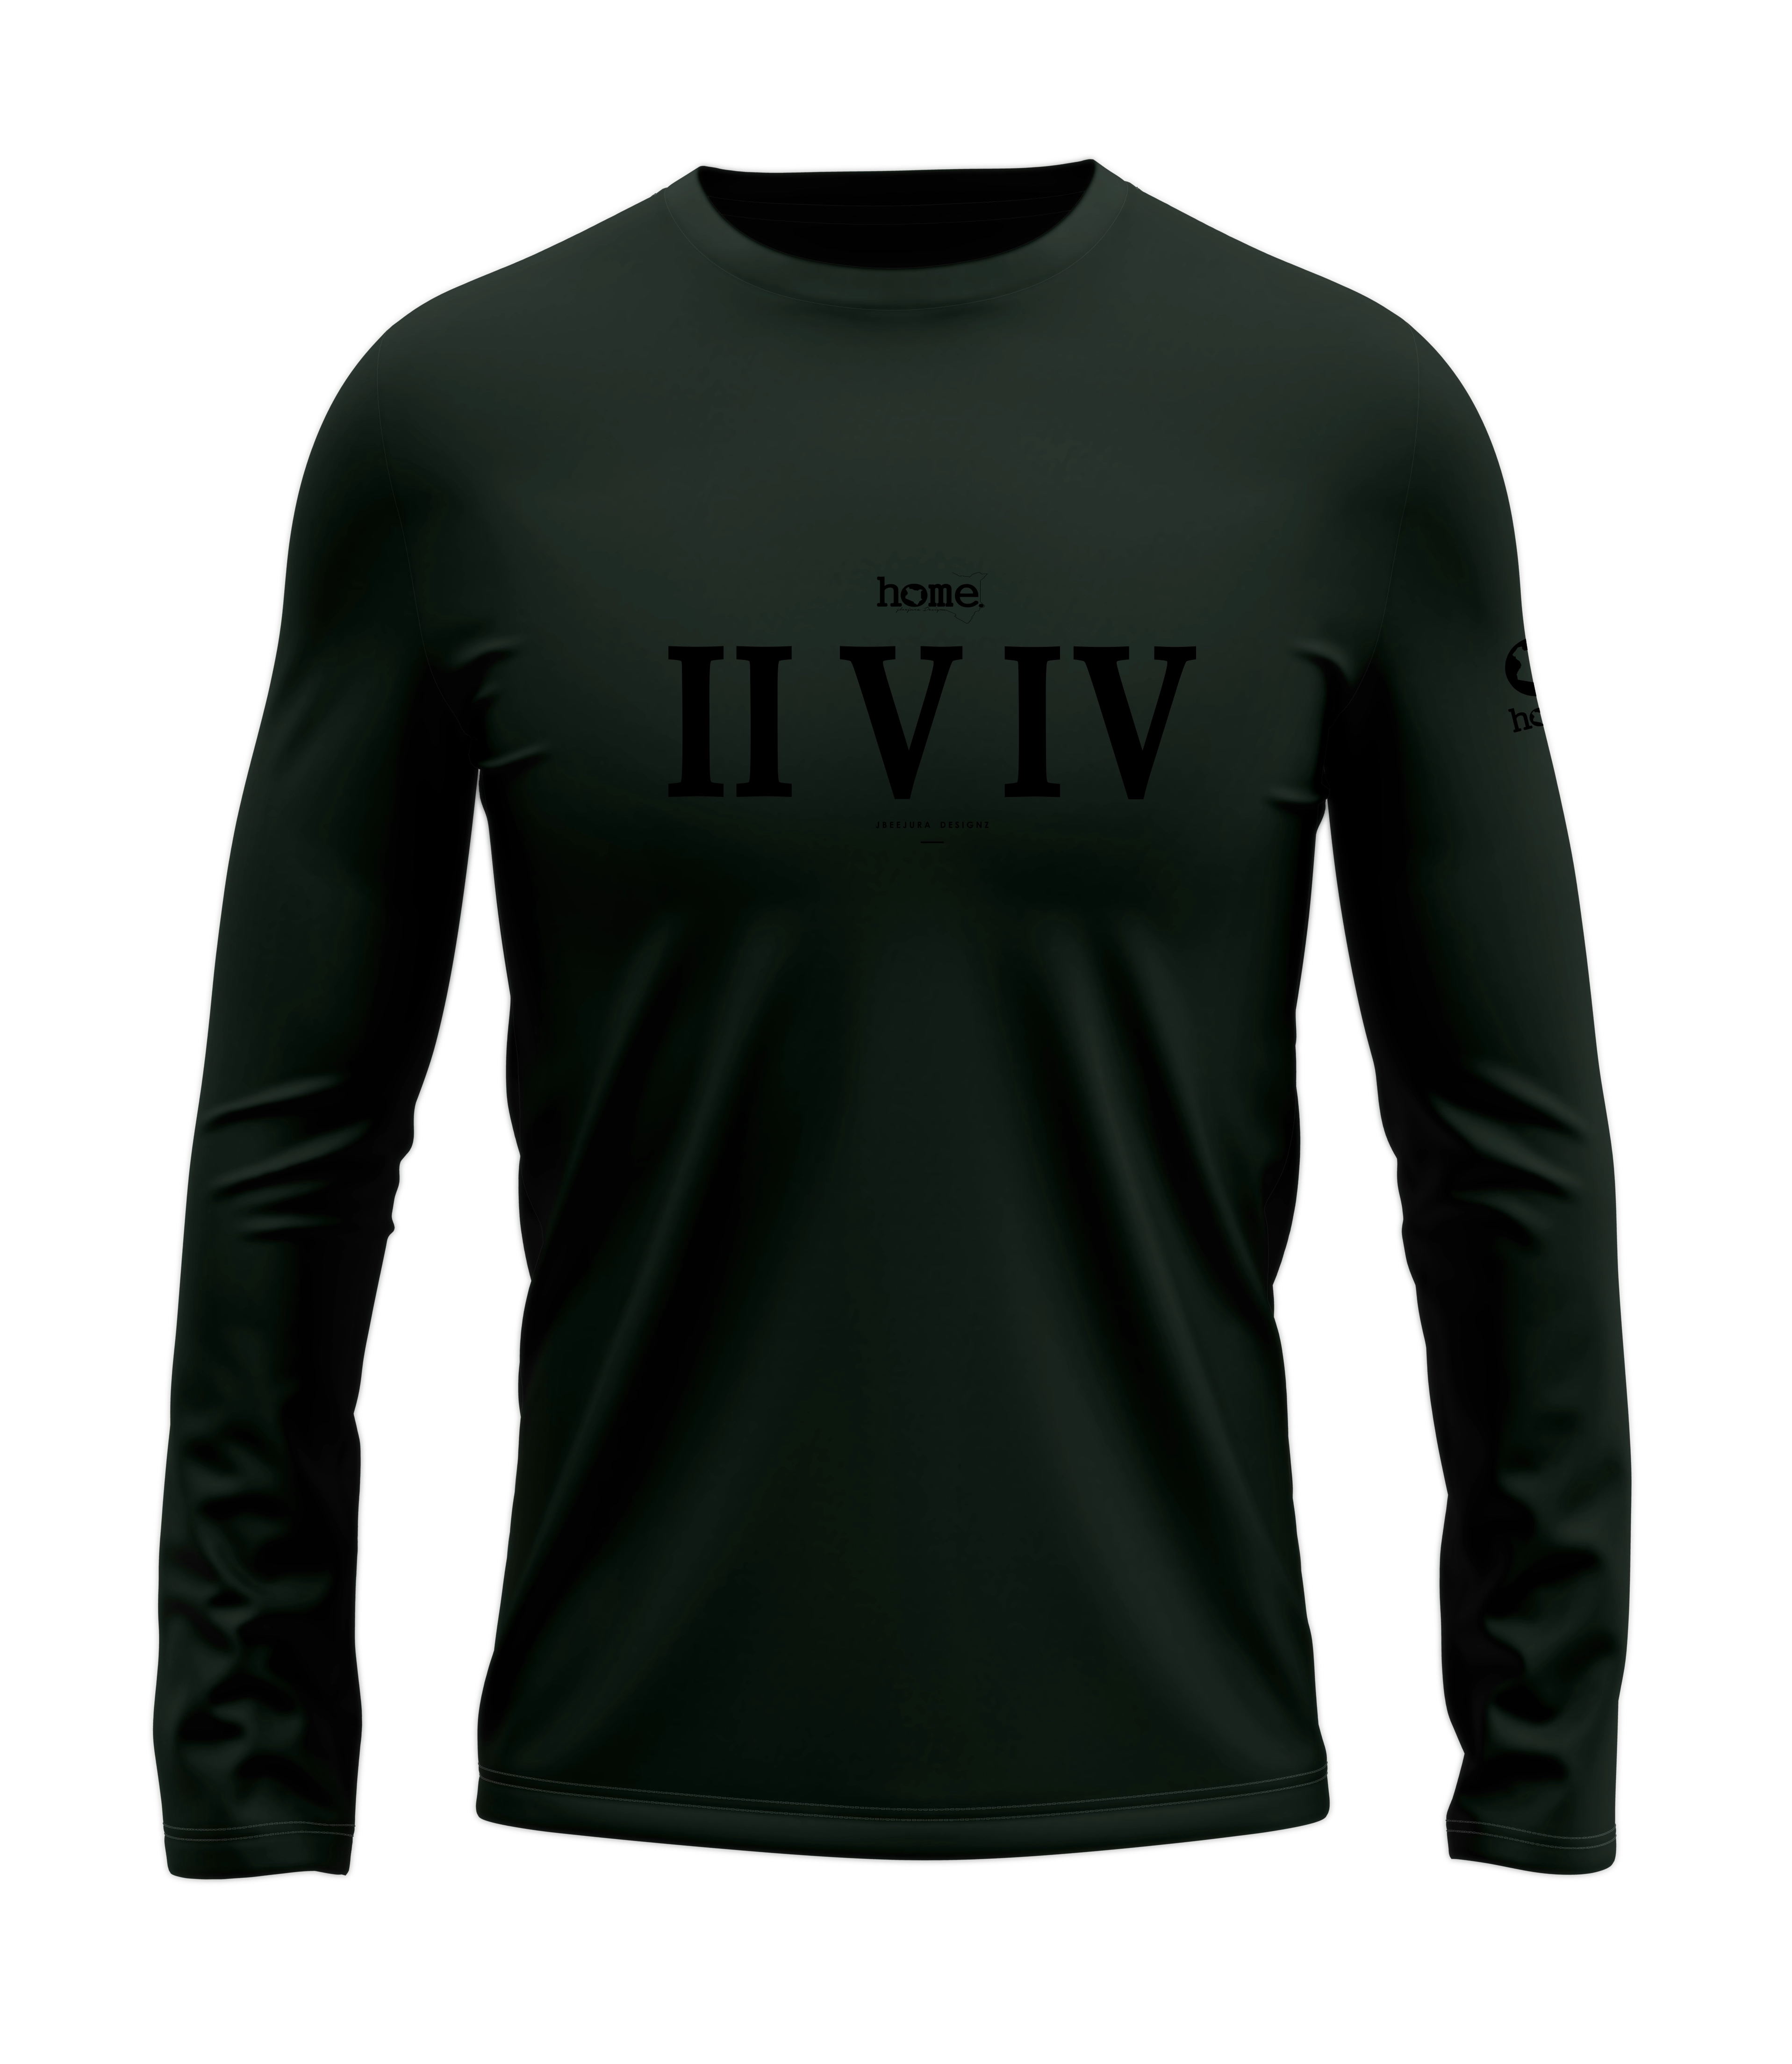 home_254 LONG-SLEEVED FOREST GREEN T-SHIRT WITH A BLACK ROMAN NUMERALS PRINT – COTTON PLUS FABRIC